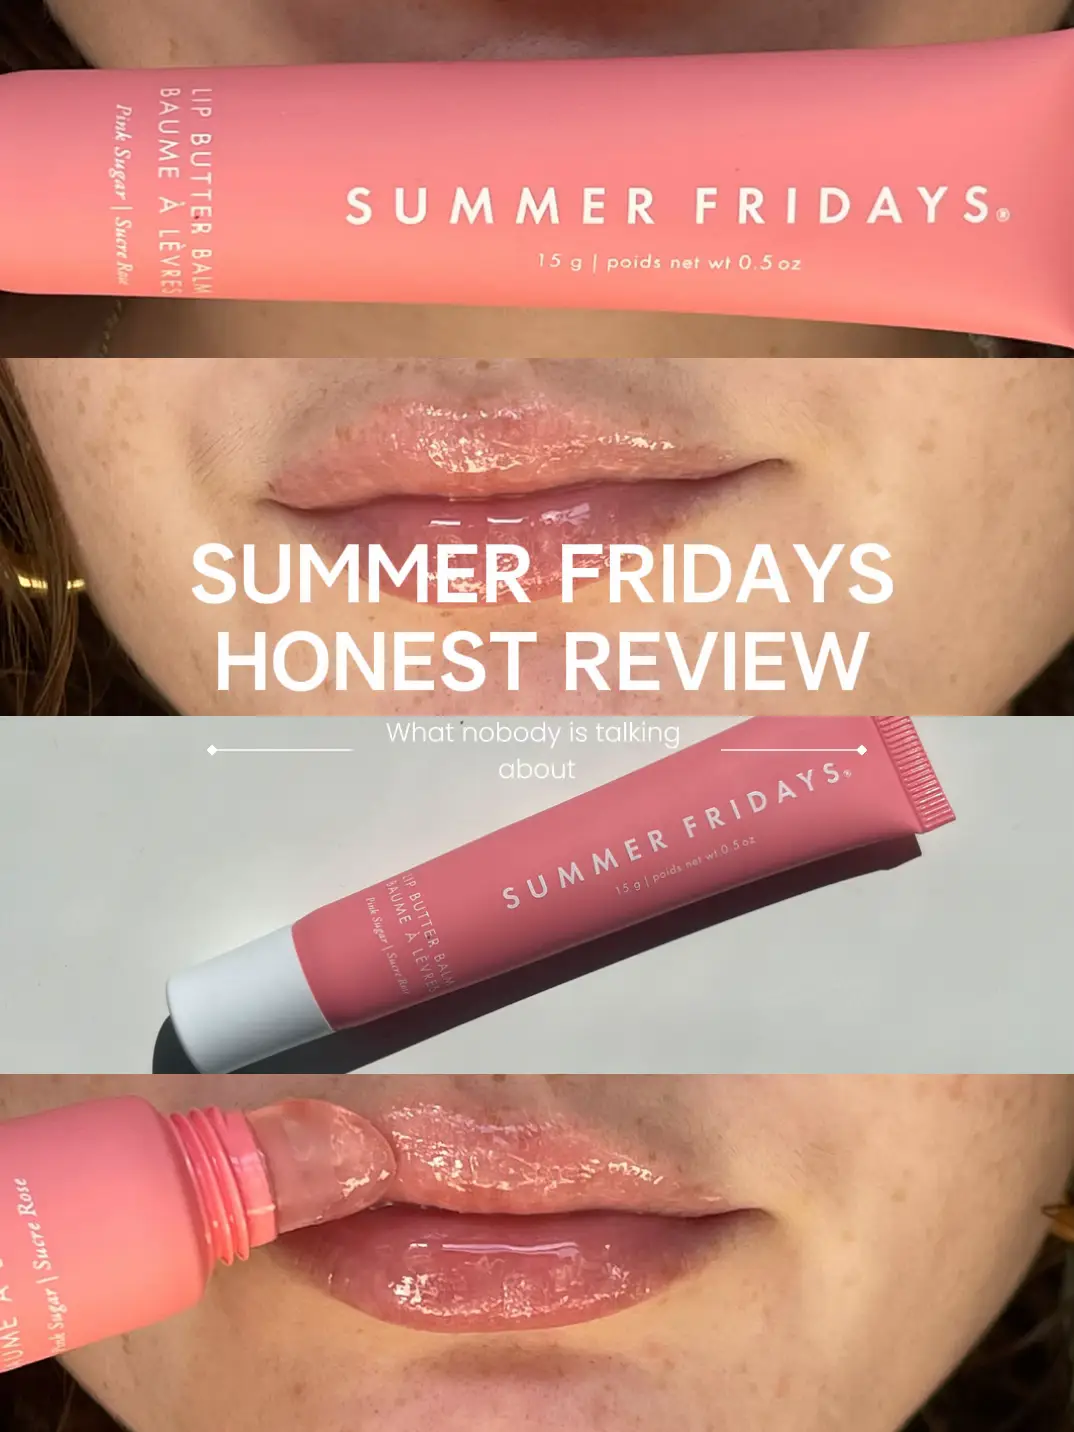 Summer Fridays Honest Review's images